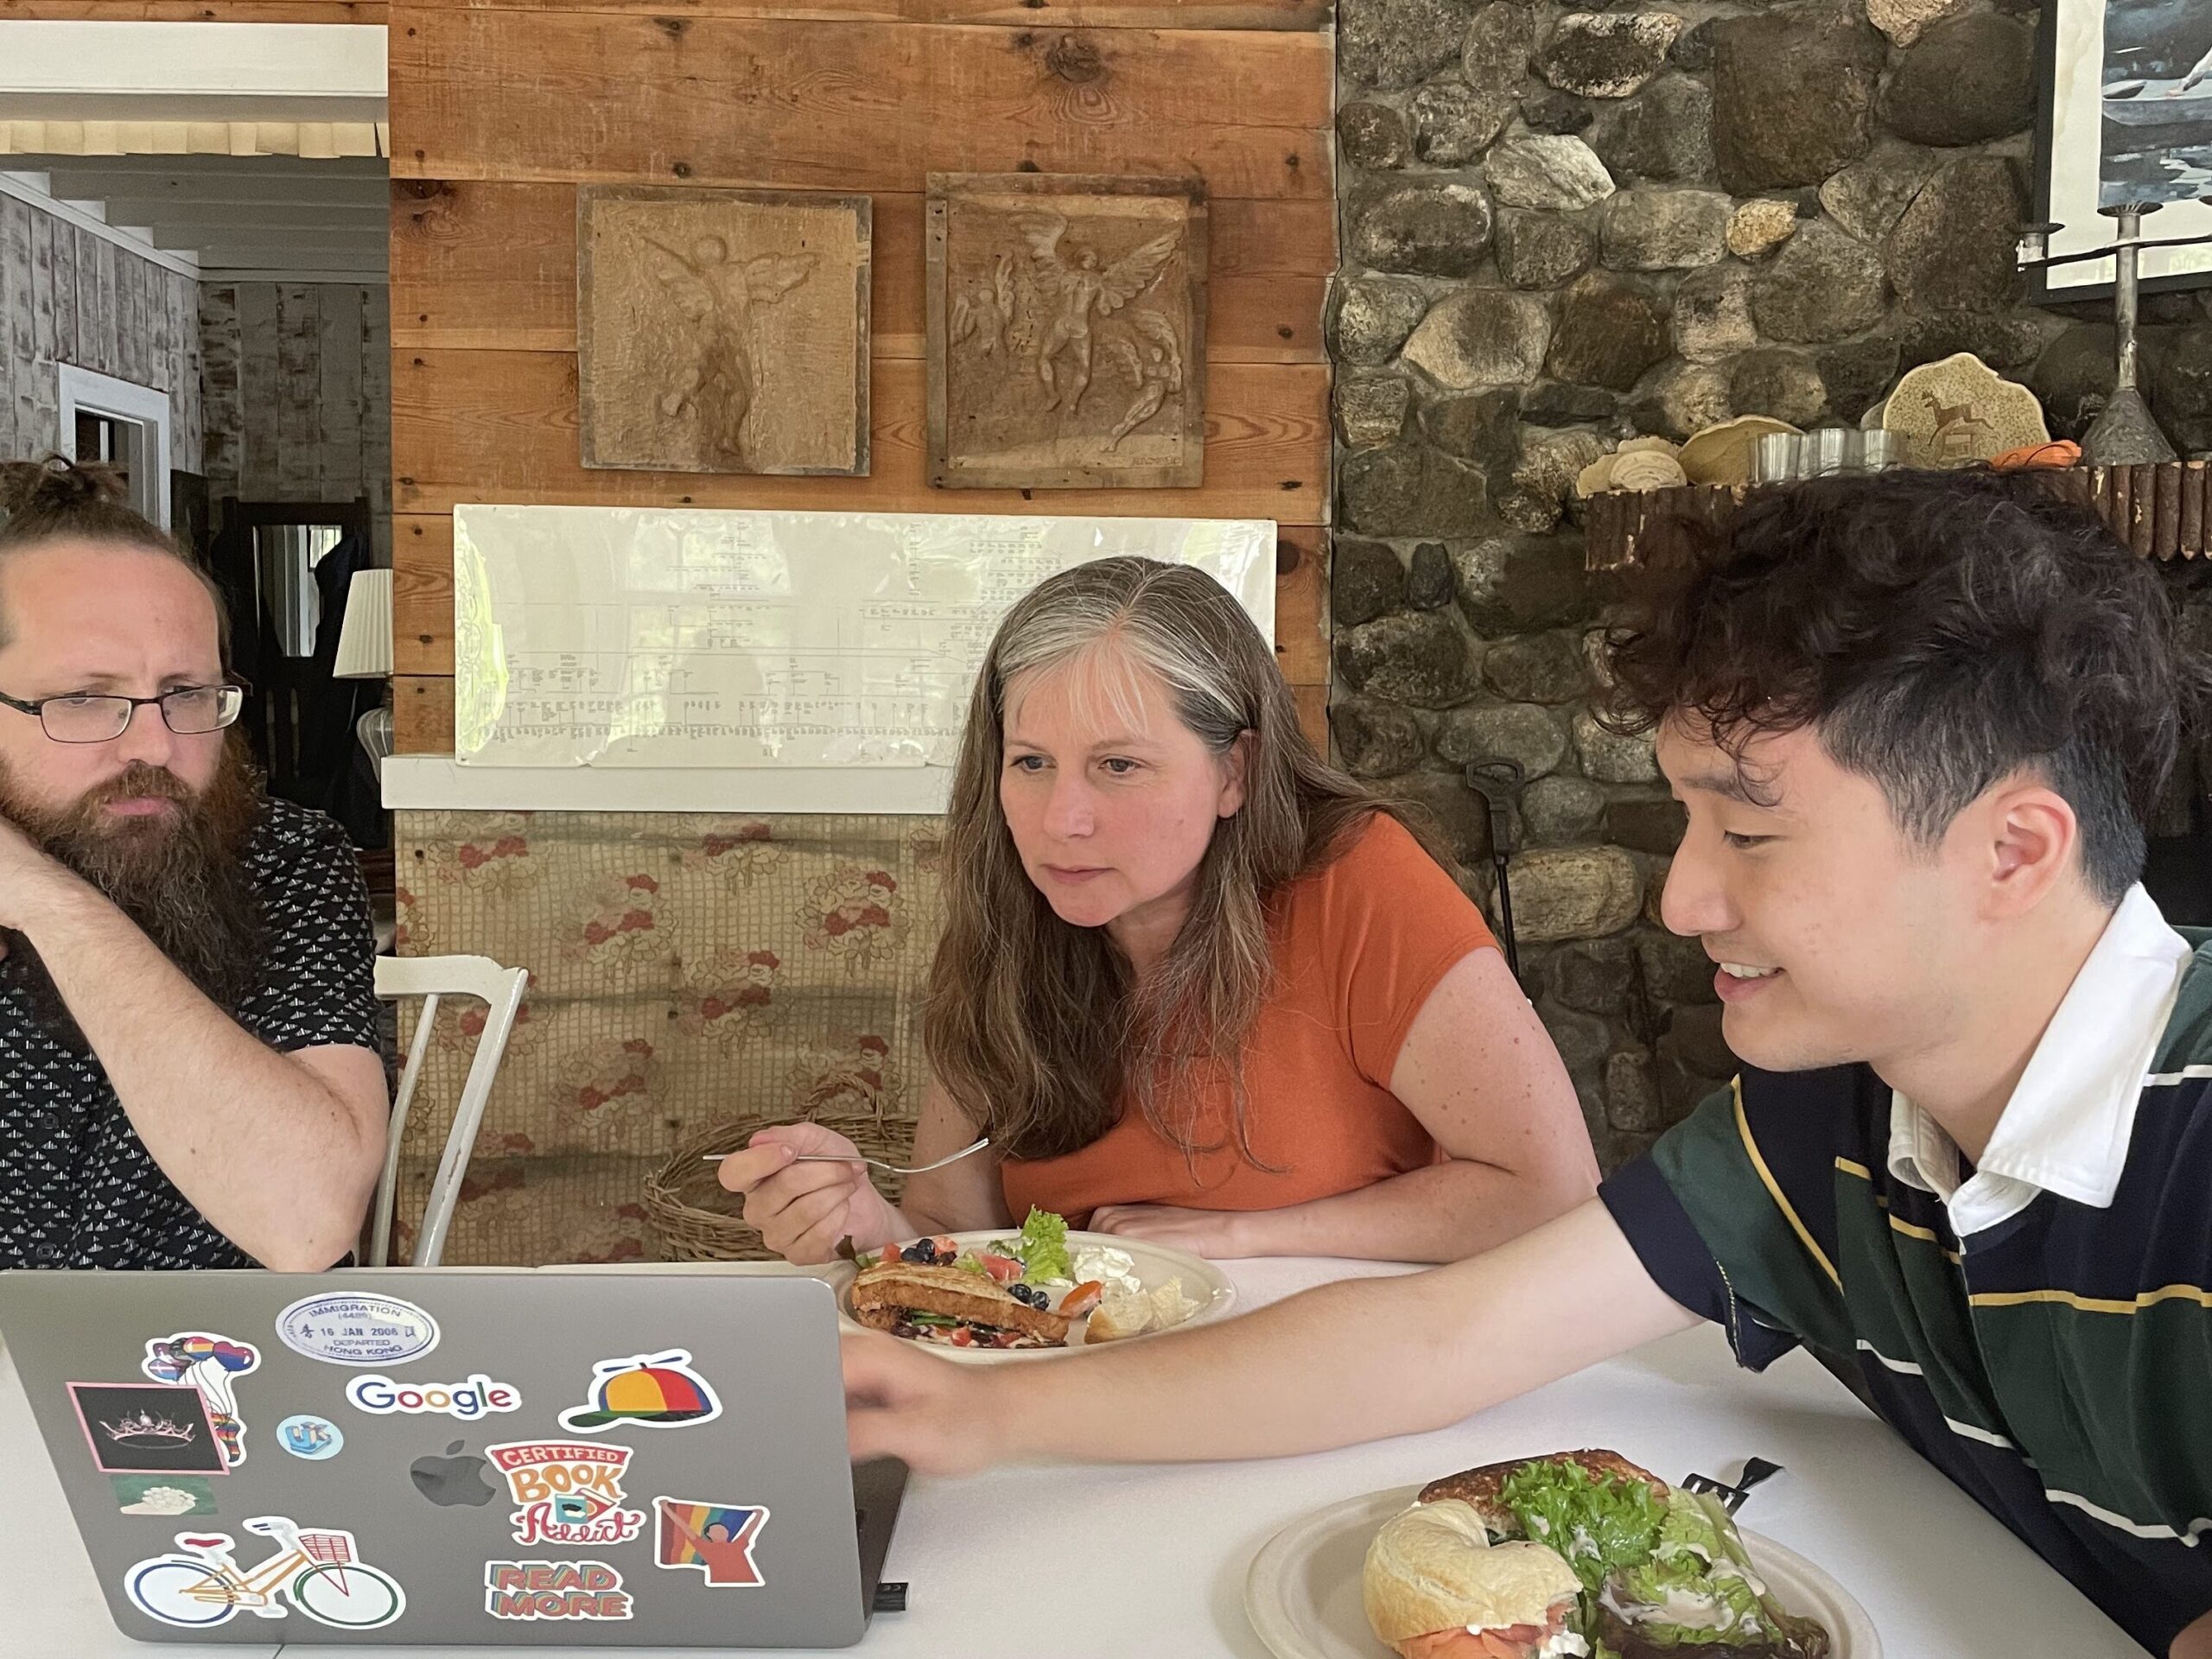 Three people sitting at a table eating food and looking at a computer.